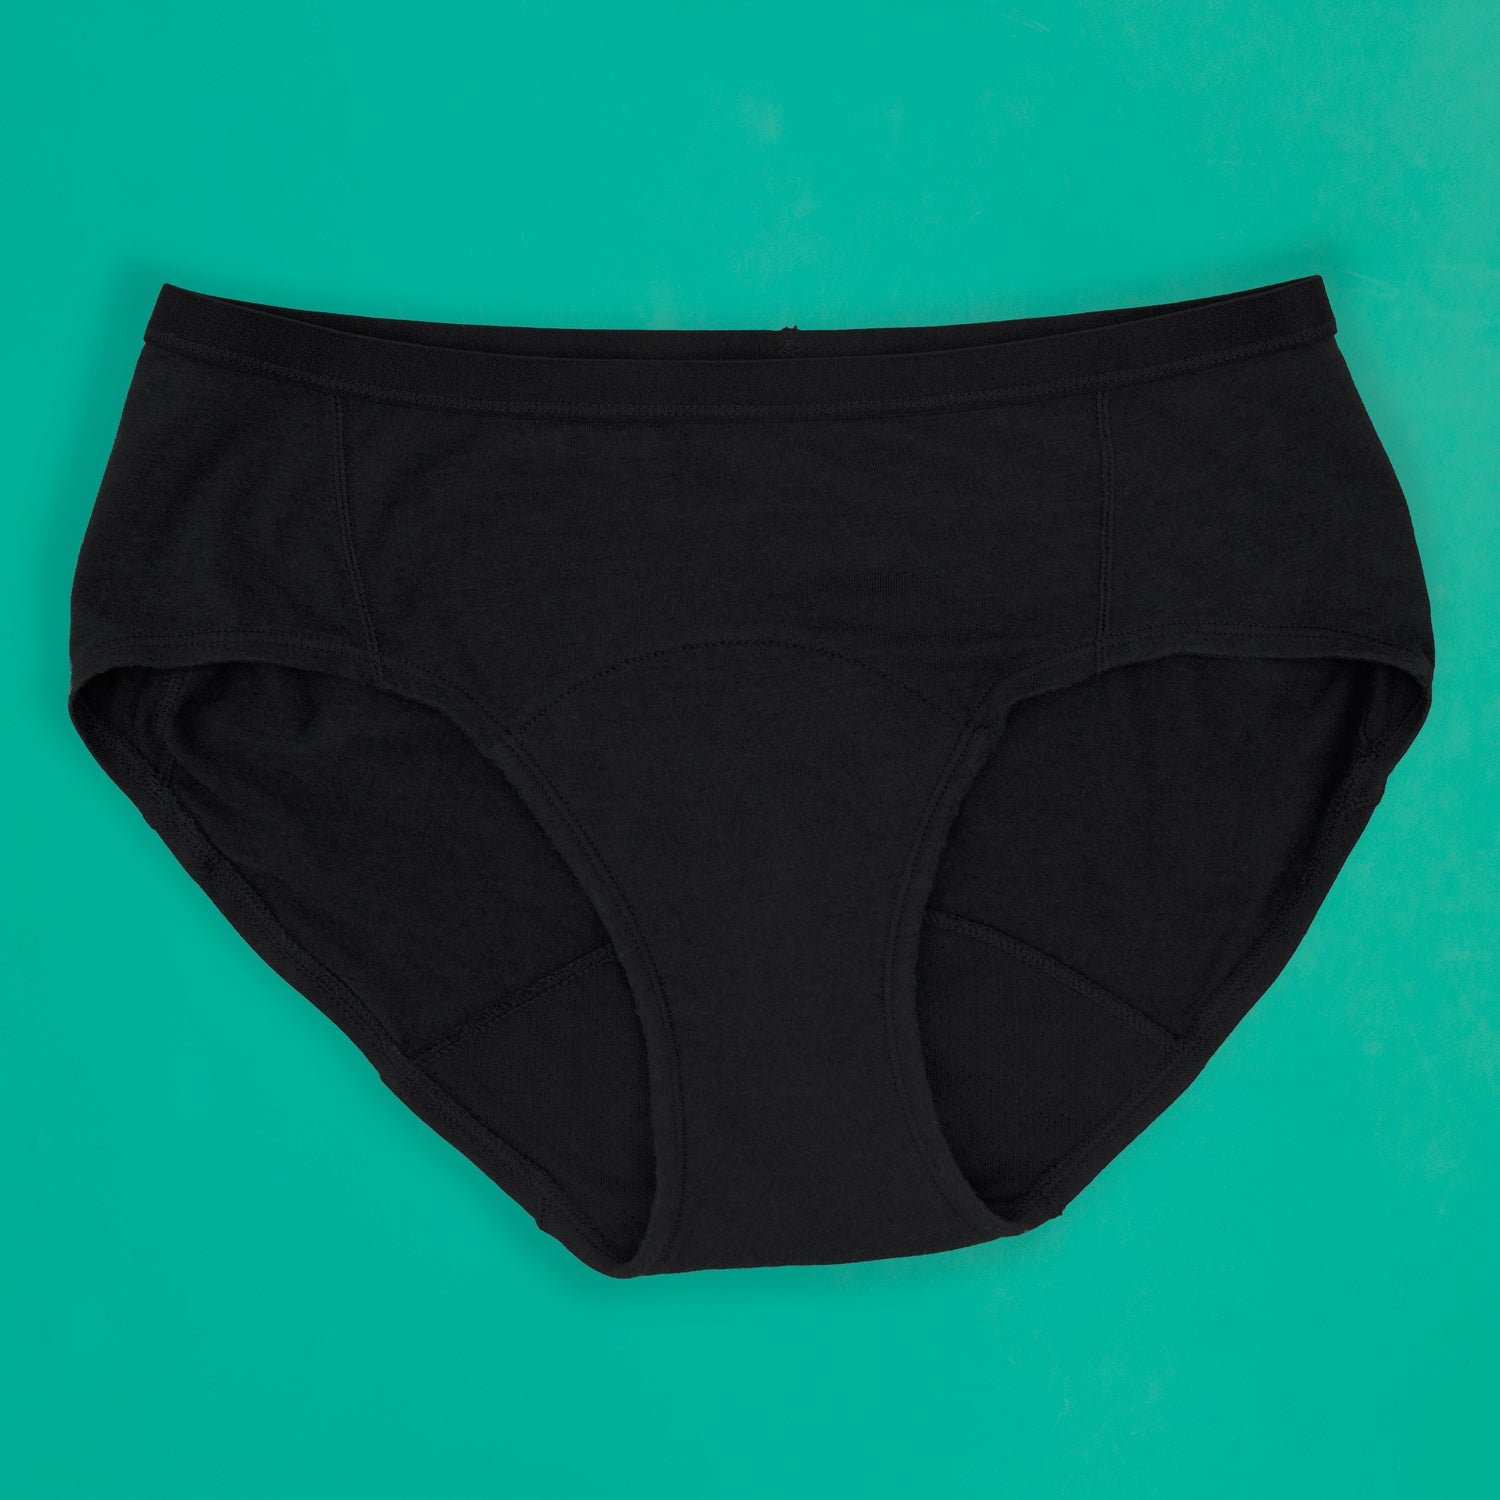 Aisle leakproof hipster period underwear